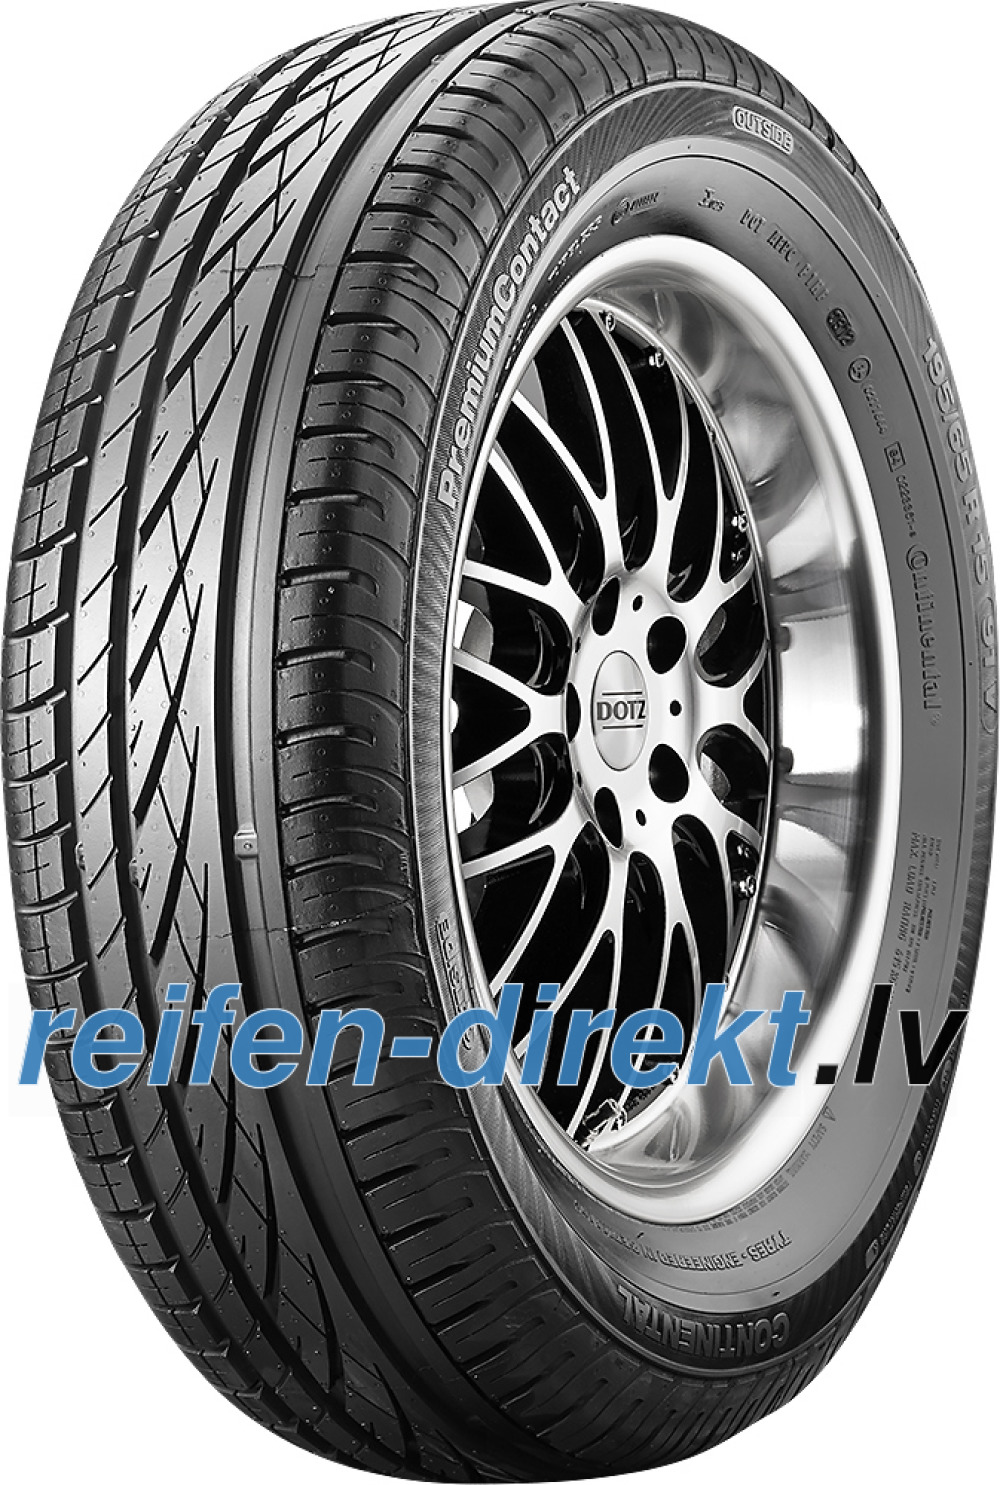 silent crew only Continental ContiPremiumContact SSR 205/55 R16 91V *, runflat vasaras riepas